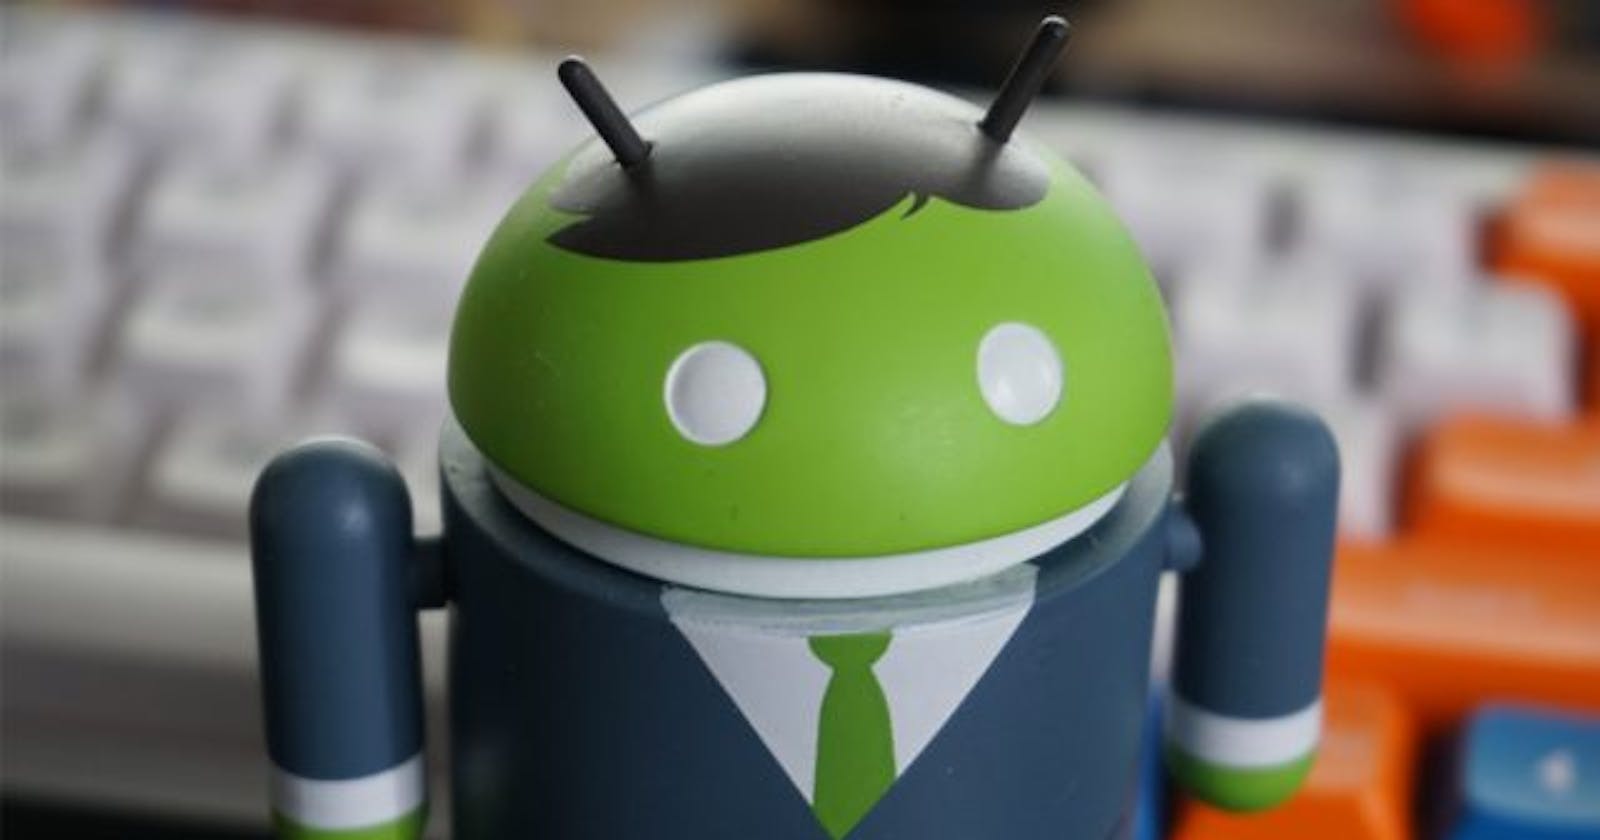 How To Crack Any Android App, Game Or Anything Been Is A Third Party App